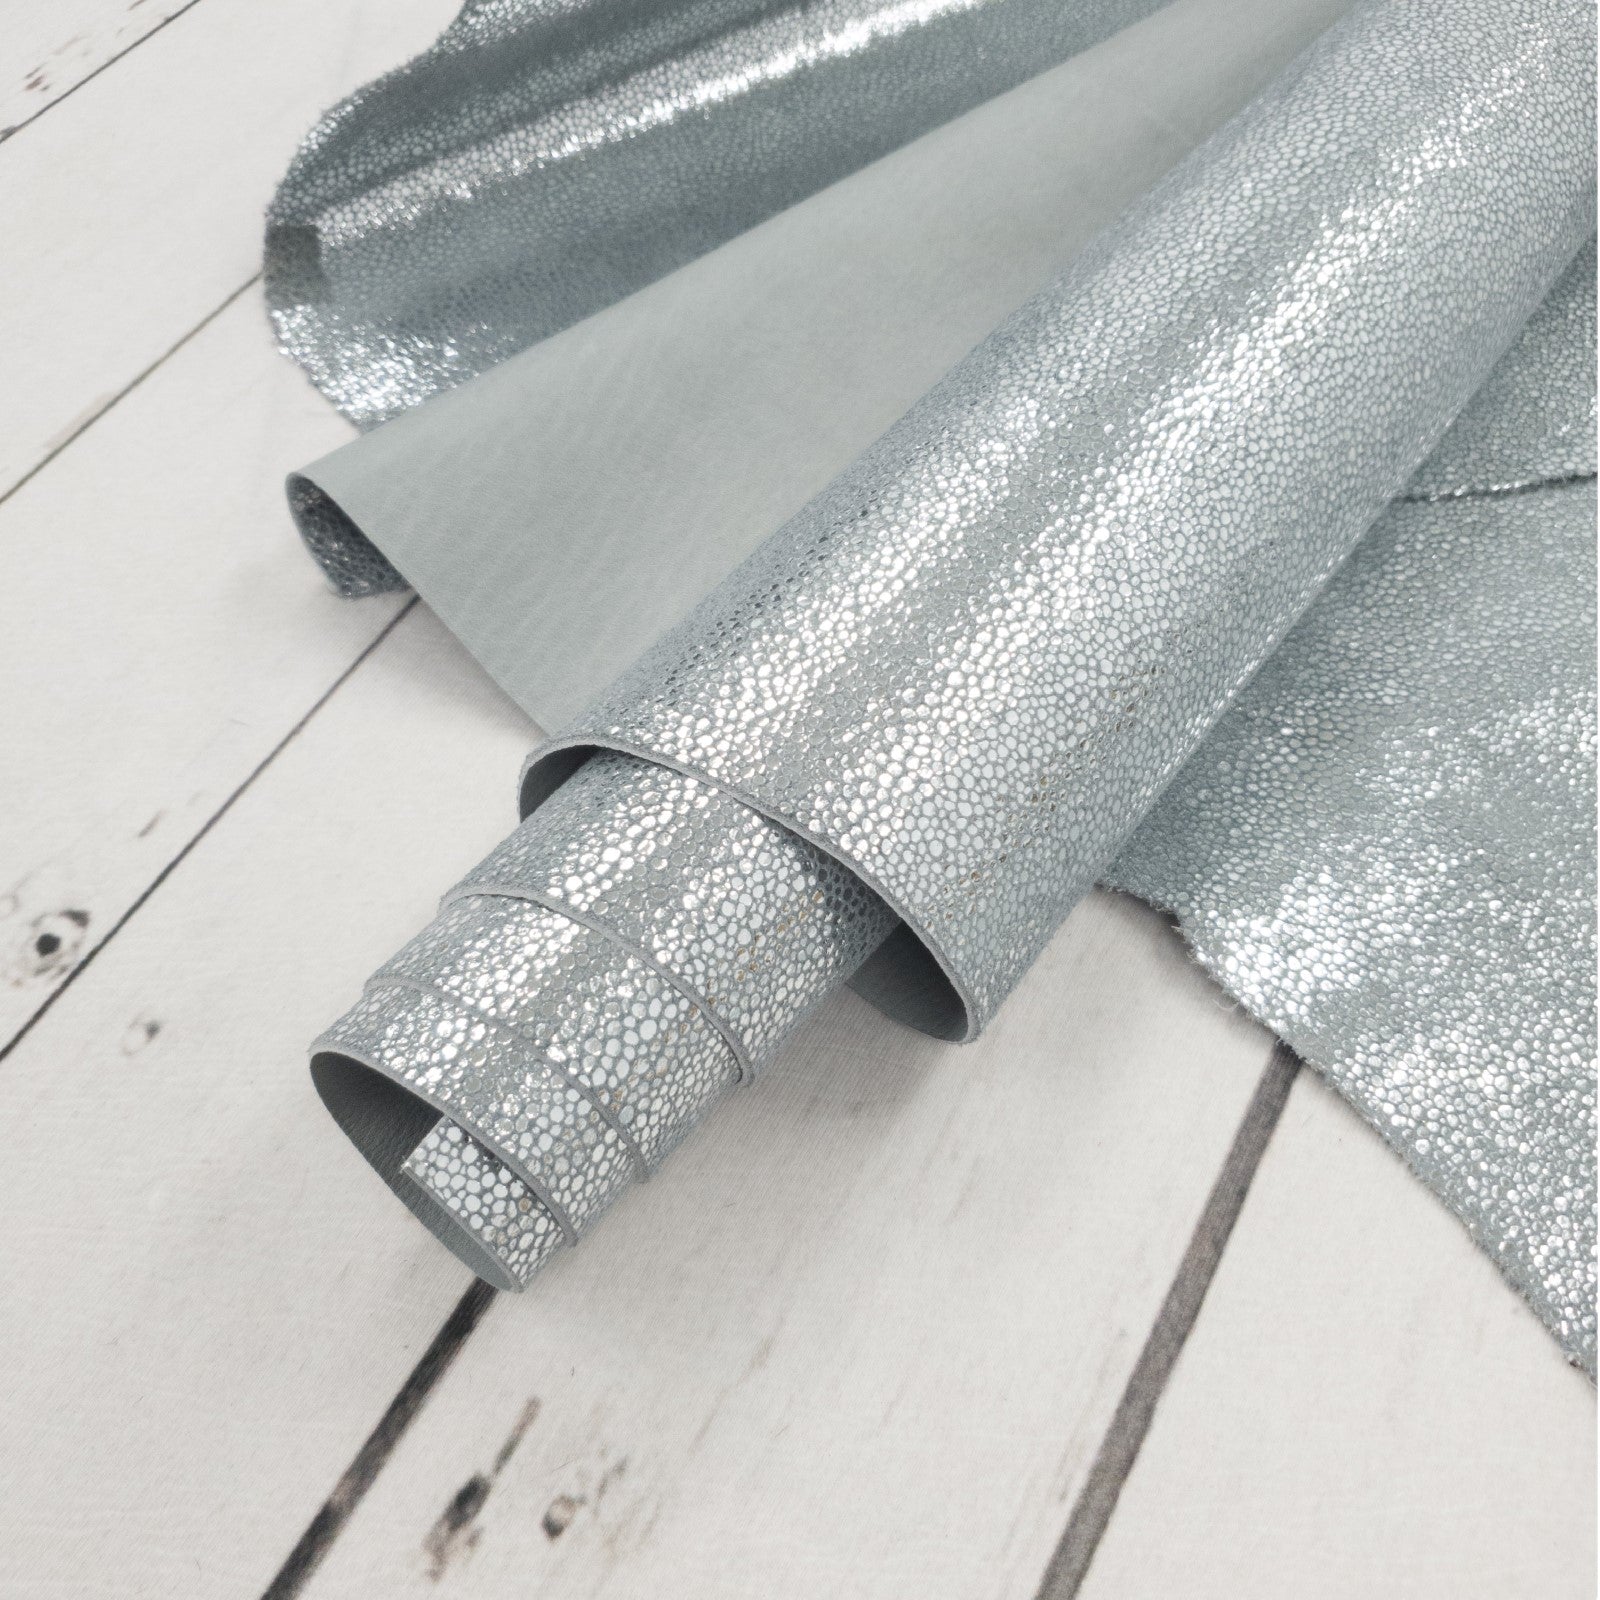 Metallic Silver Sizzling Stingray 2-3 oz Cow Hides,  | The Leather Guy